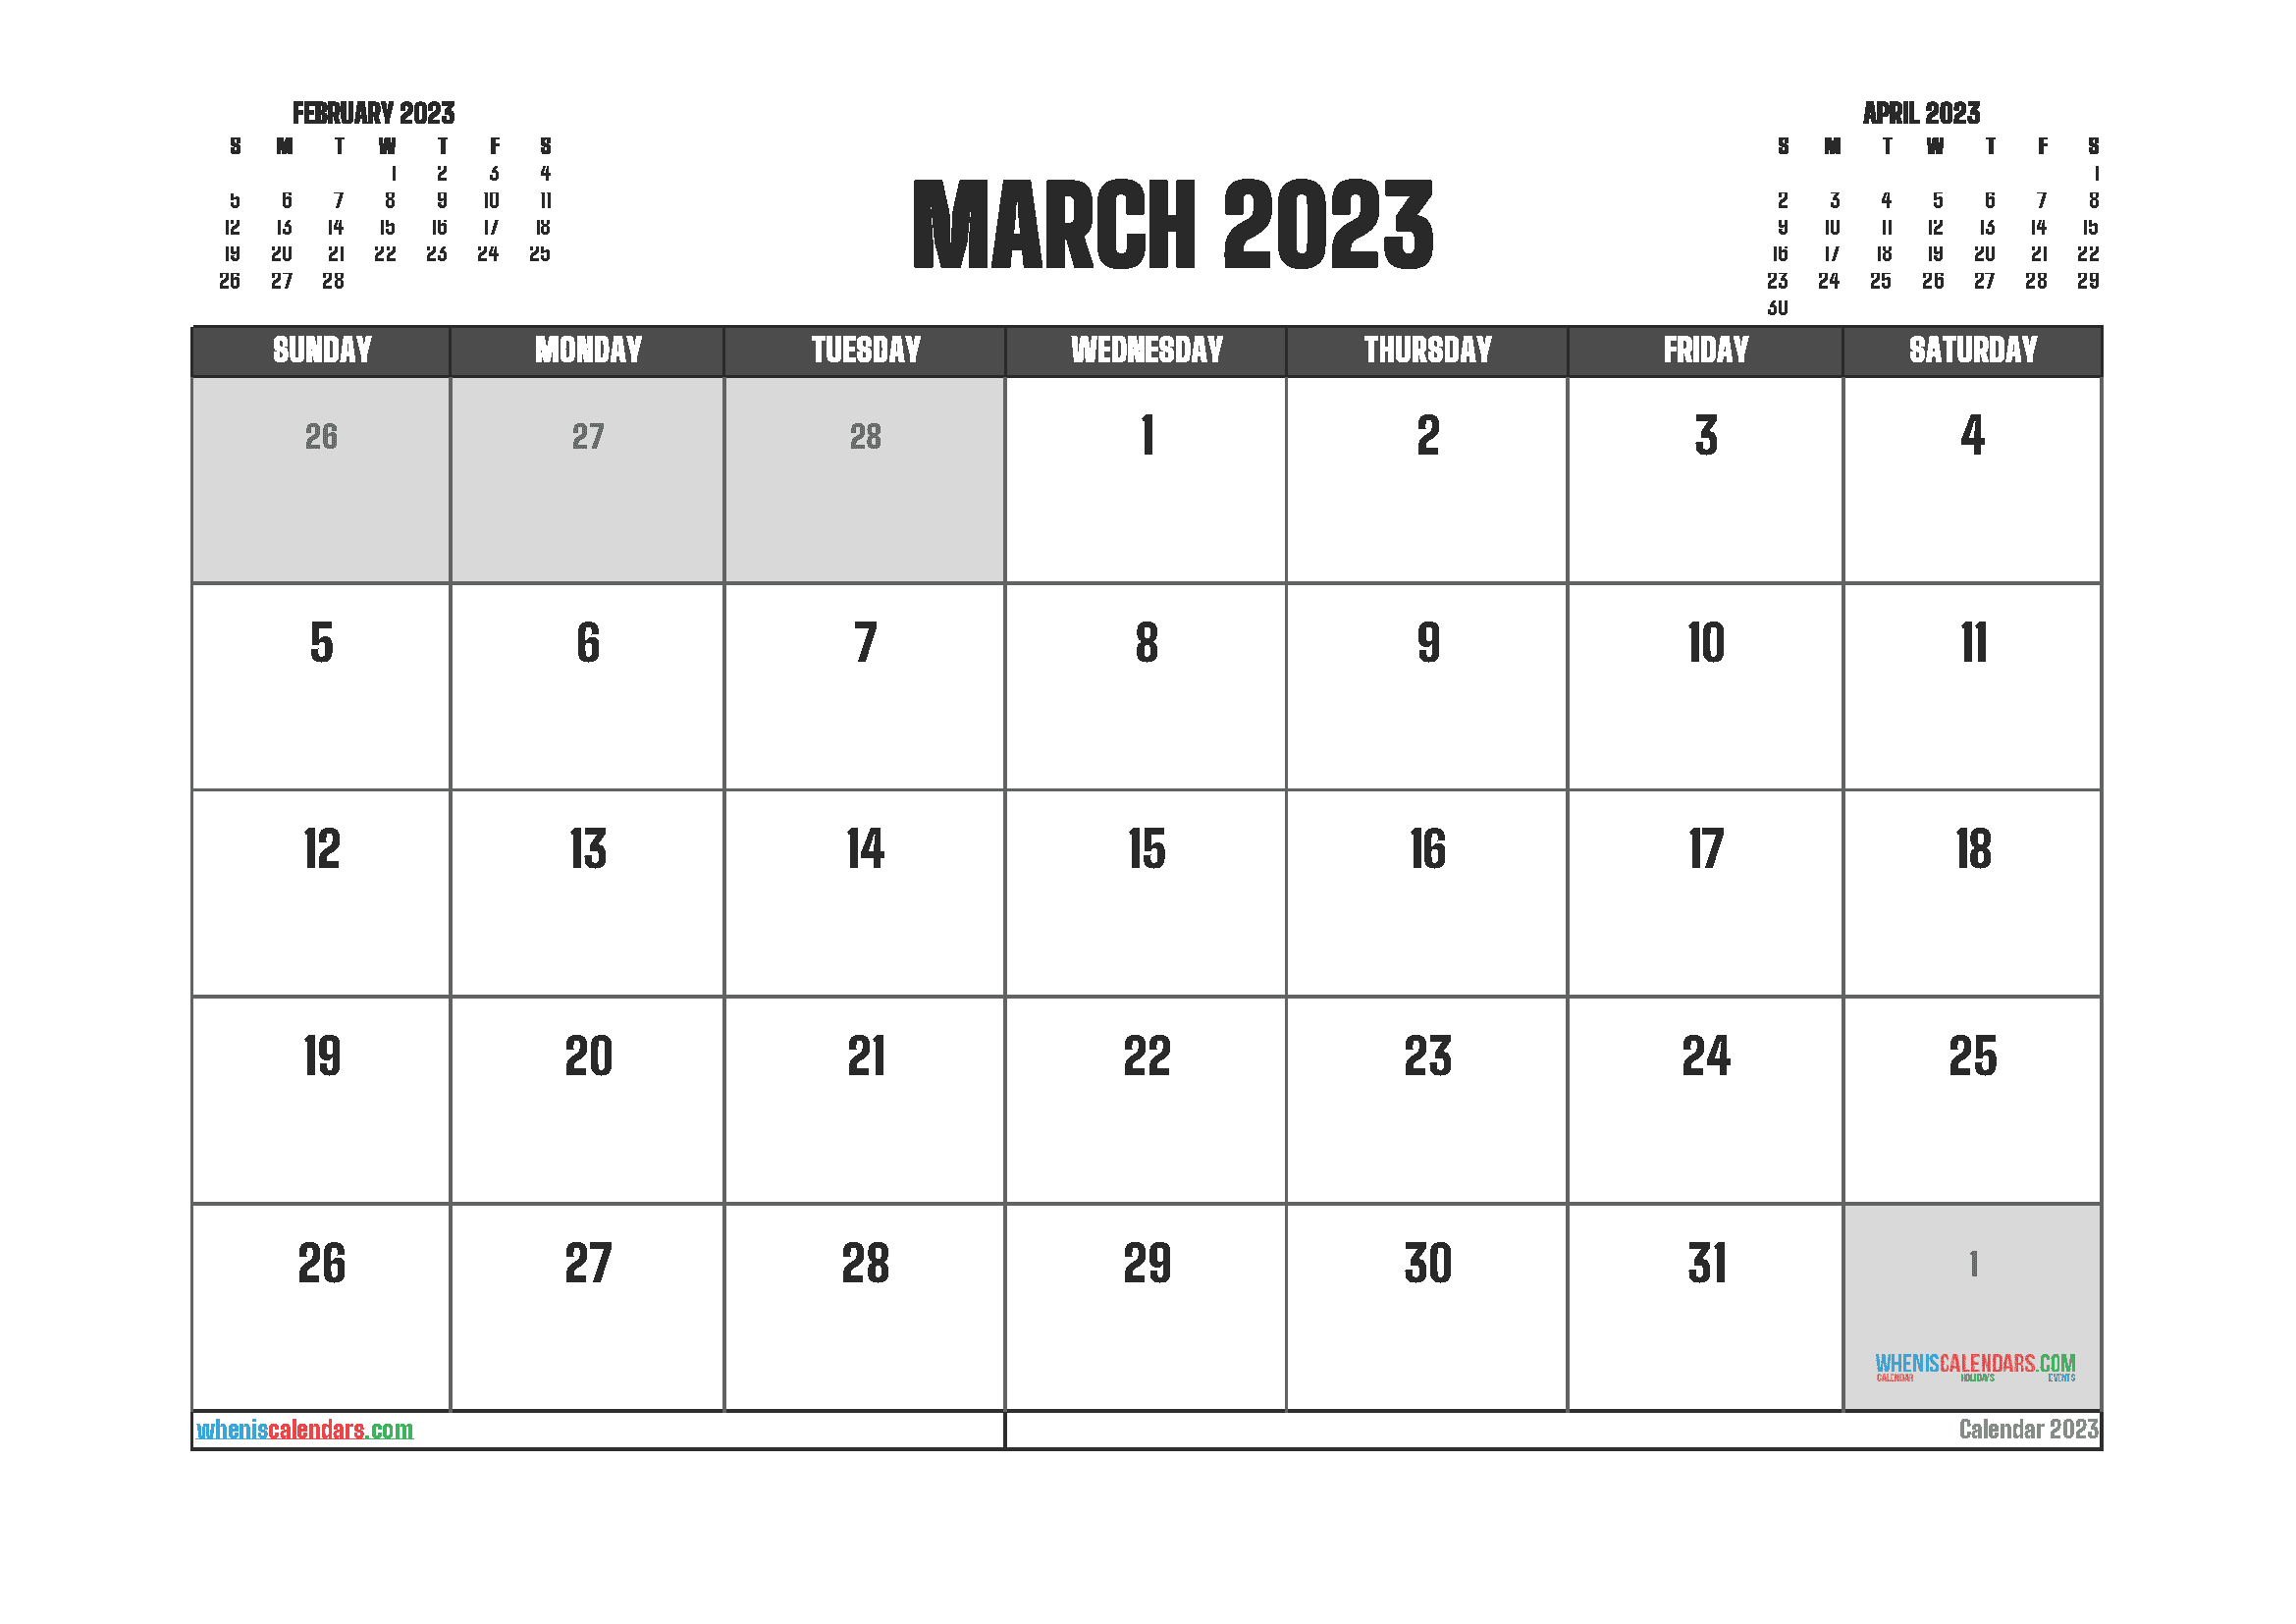 Free Printable Calendar 2023 March with Holidays PDF in Landscape